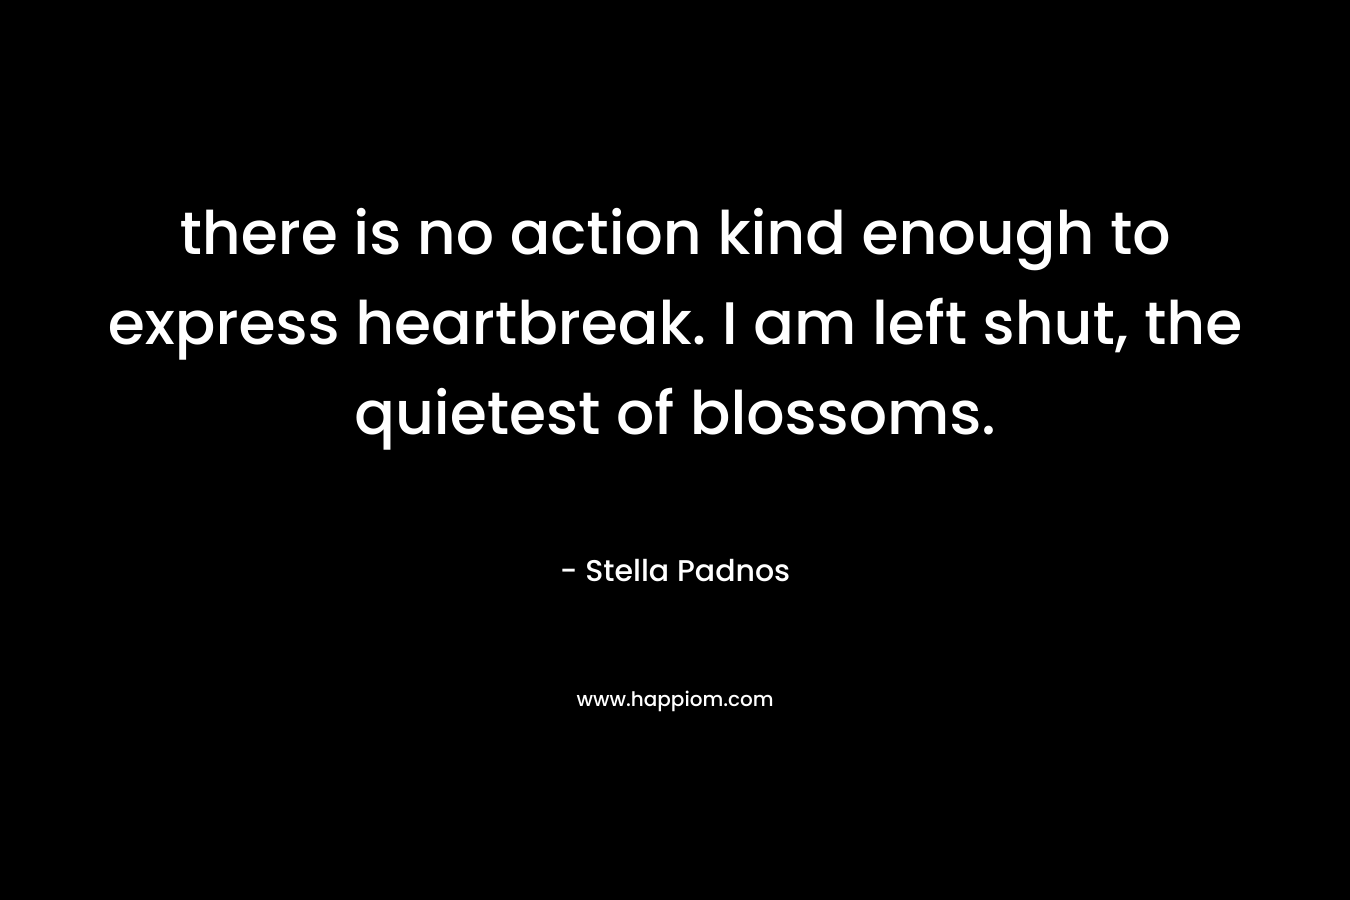 there is no action kind enough to express heartbreak. I am left shut, the quietest of blossoms. – Stella Padnos